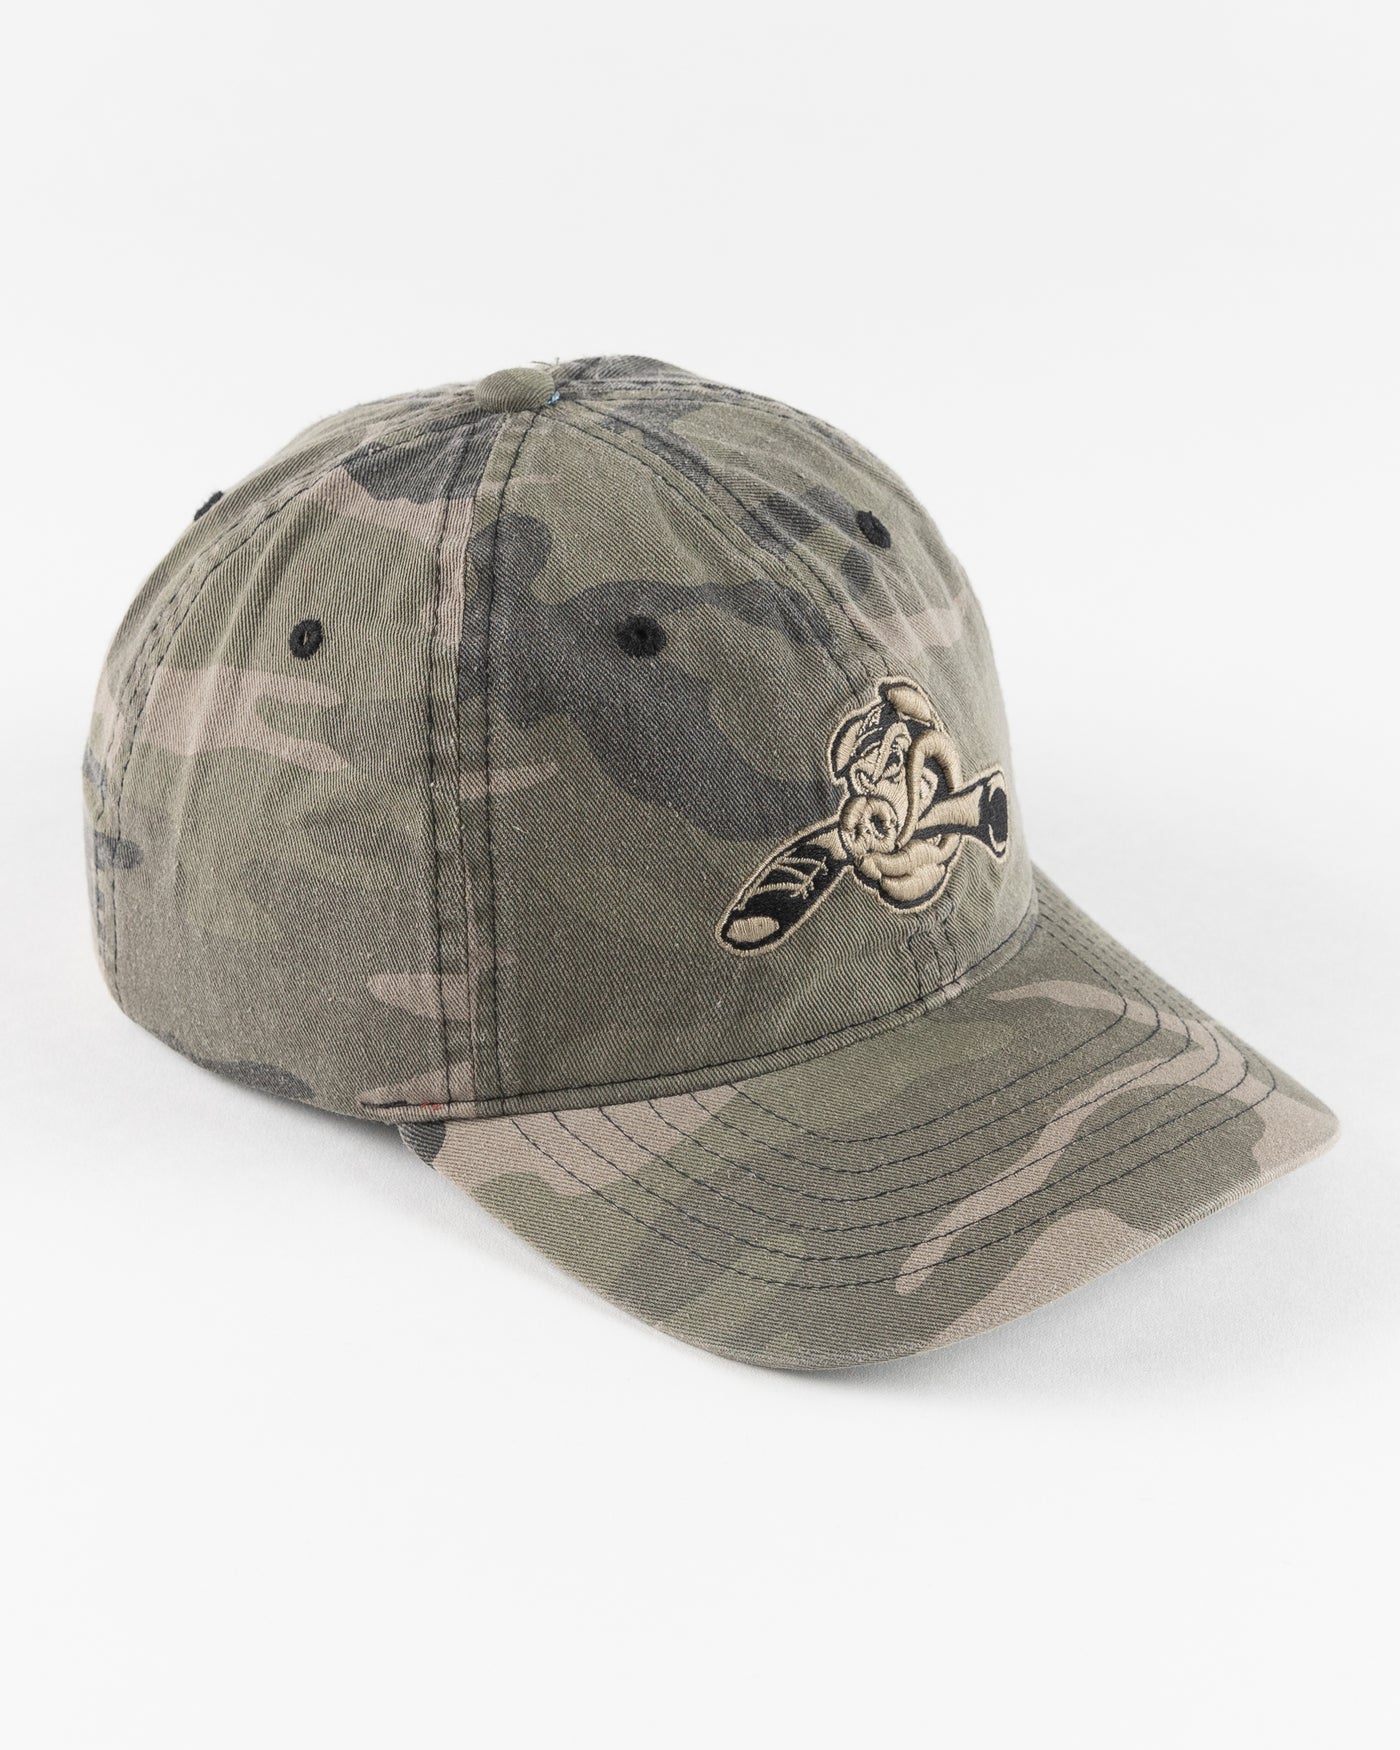 camo Zephyr adjustable cap with Hammy embroidered on front - right angle lay flat